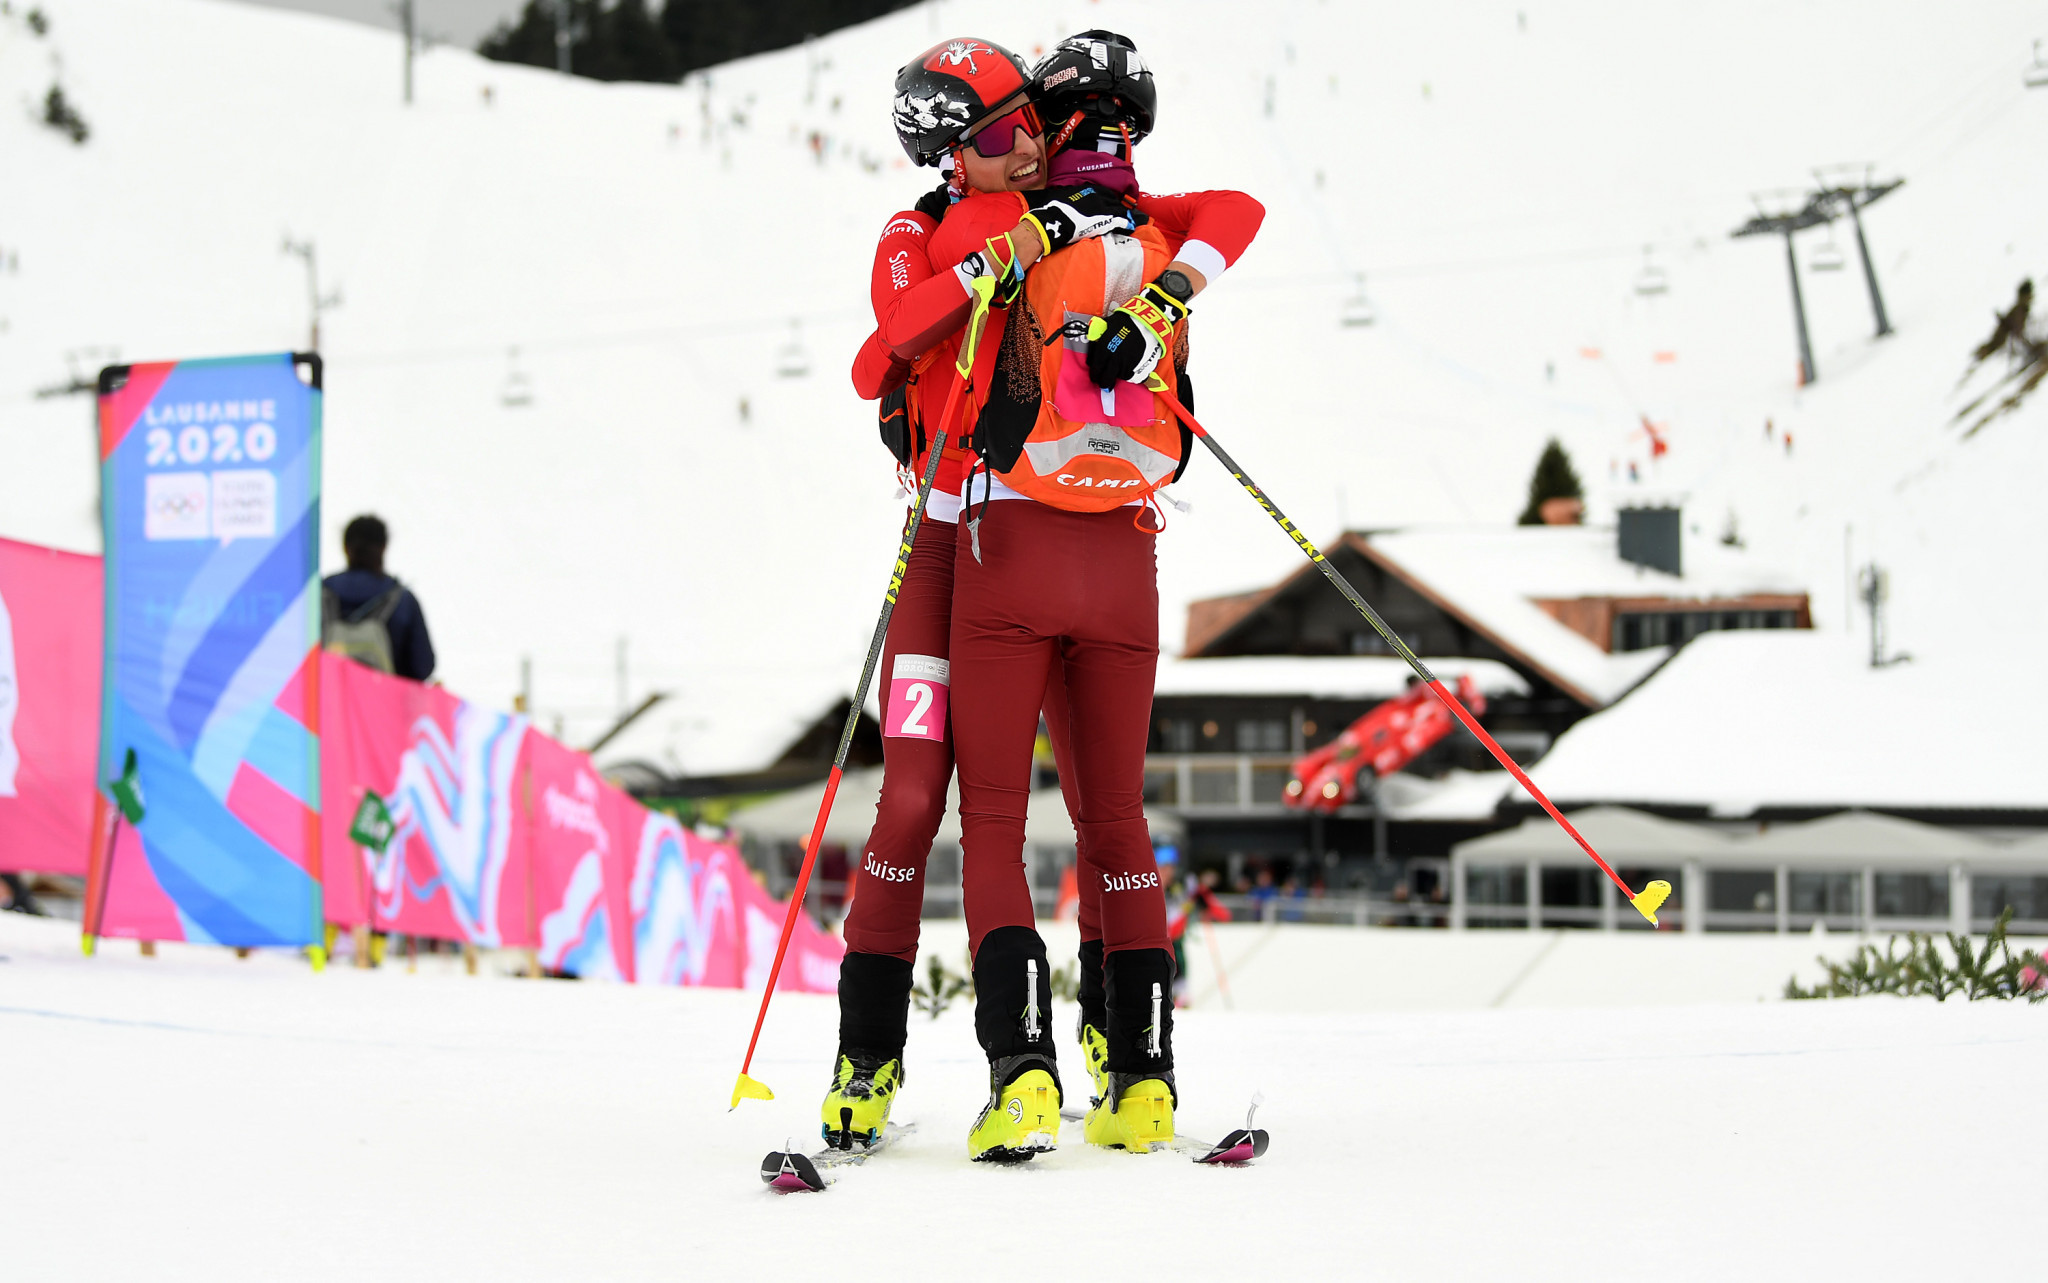 Thomas and Robin Bussard earned gold and silver ski mountaineering medals at the Lausanne 2020 Winter Youth Olympic Games ©Getty Images